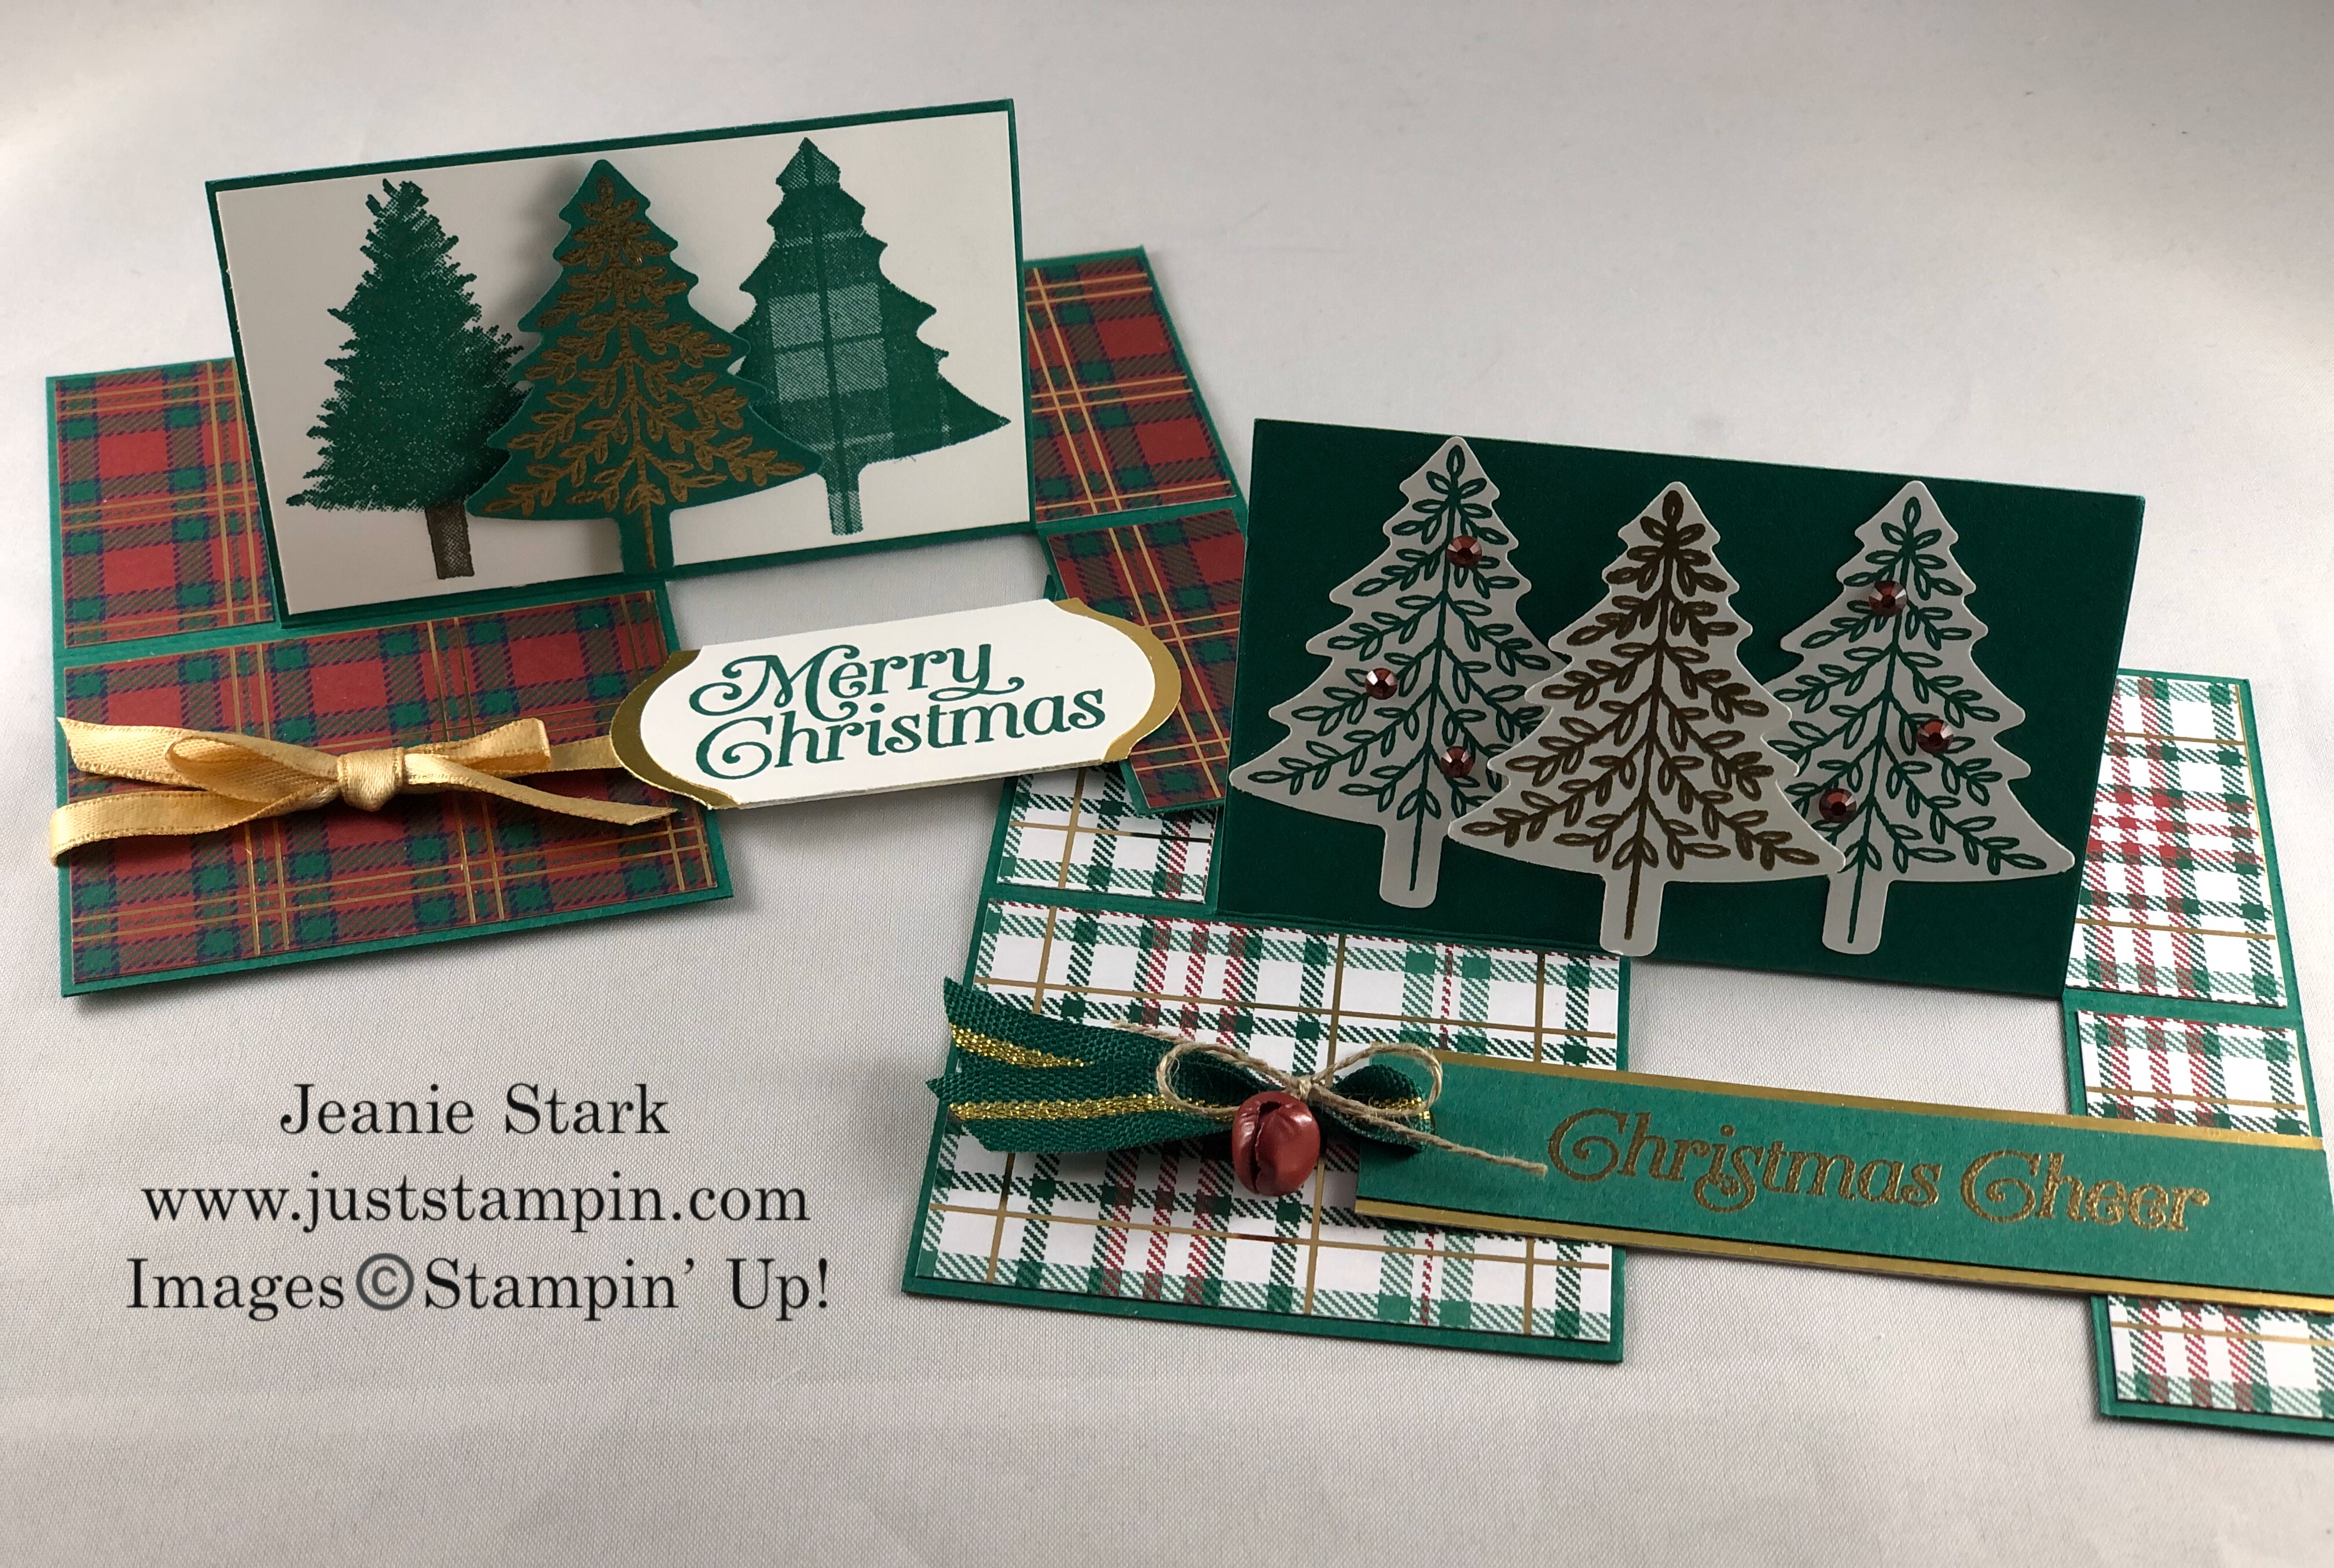 Stampin' Up! Perfectly Plaid Fun Fold Christmas card idea - Jeanie Stark StampinUp